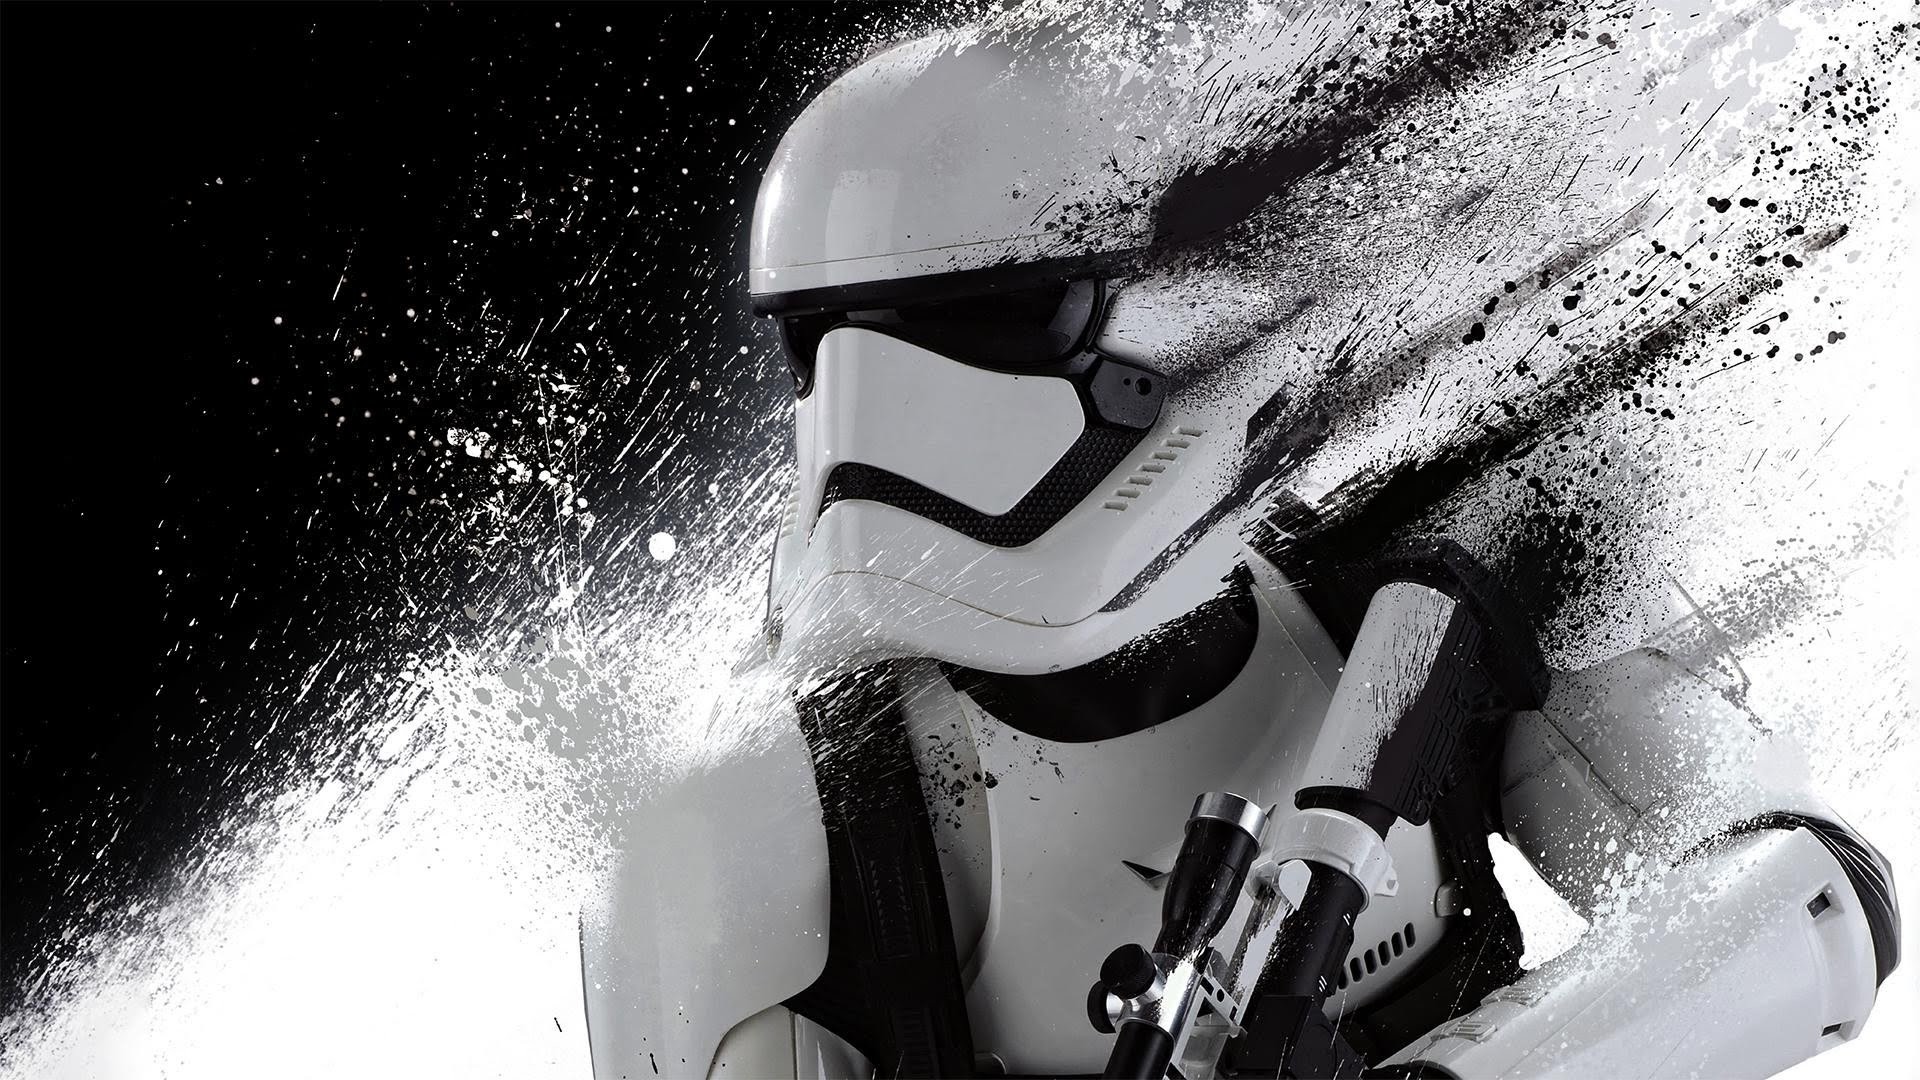 1920x1080  Awesome Star Wars Wallpaper! 89 Â· Download Â· Res:  ...